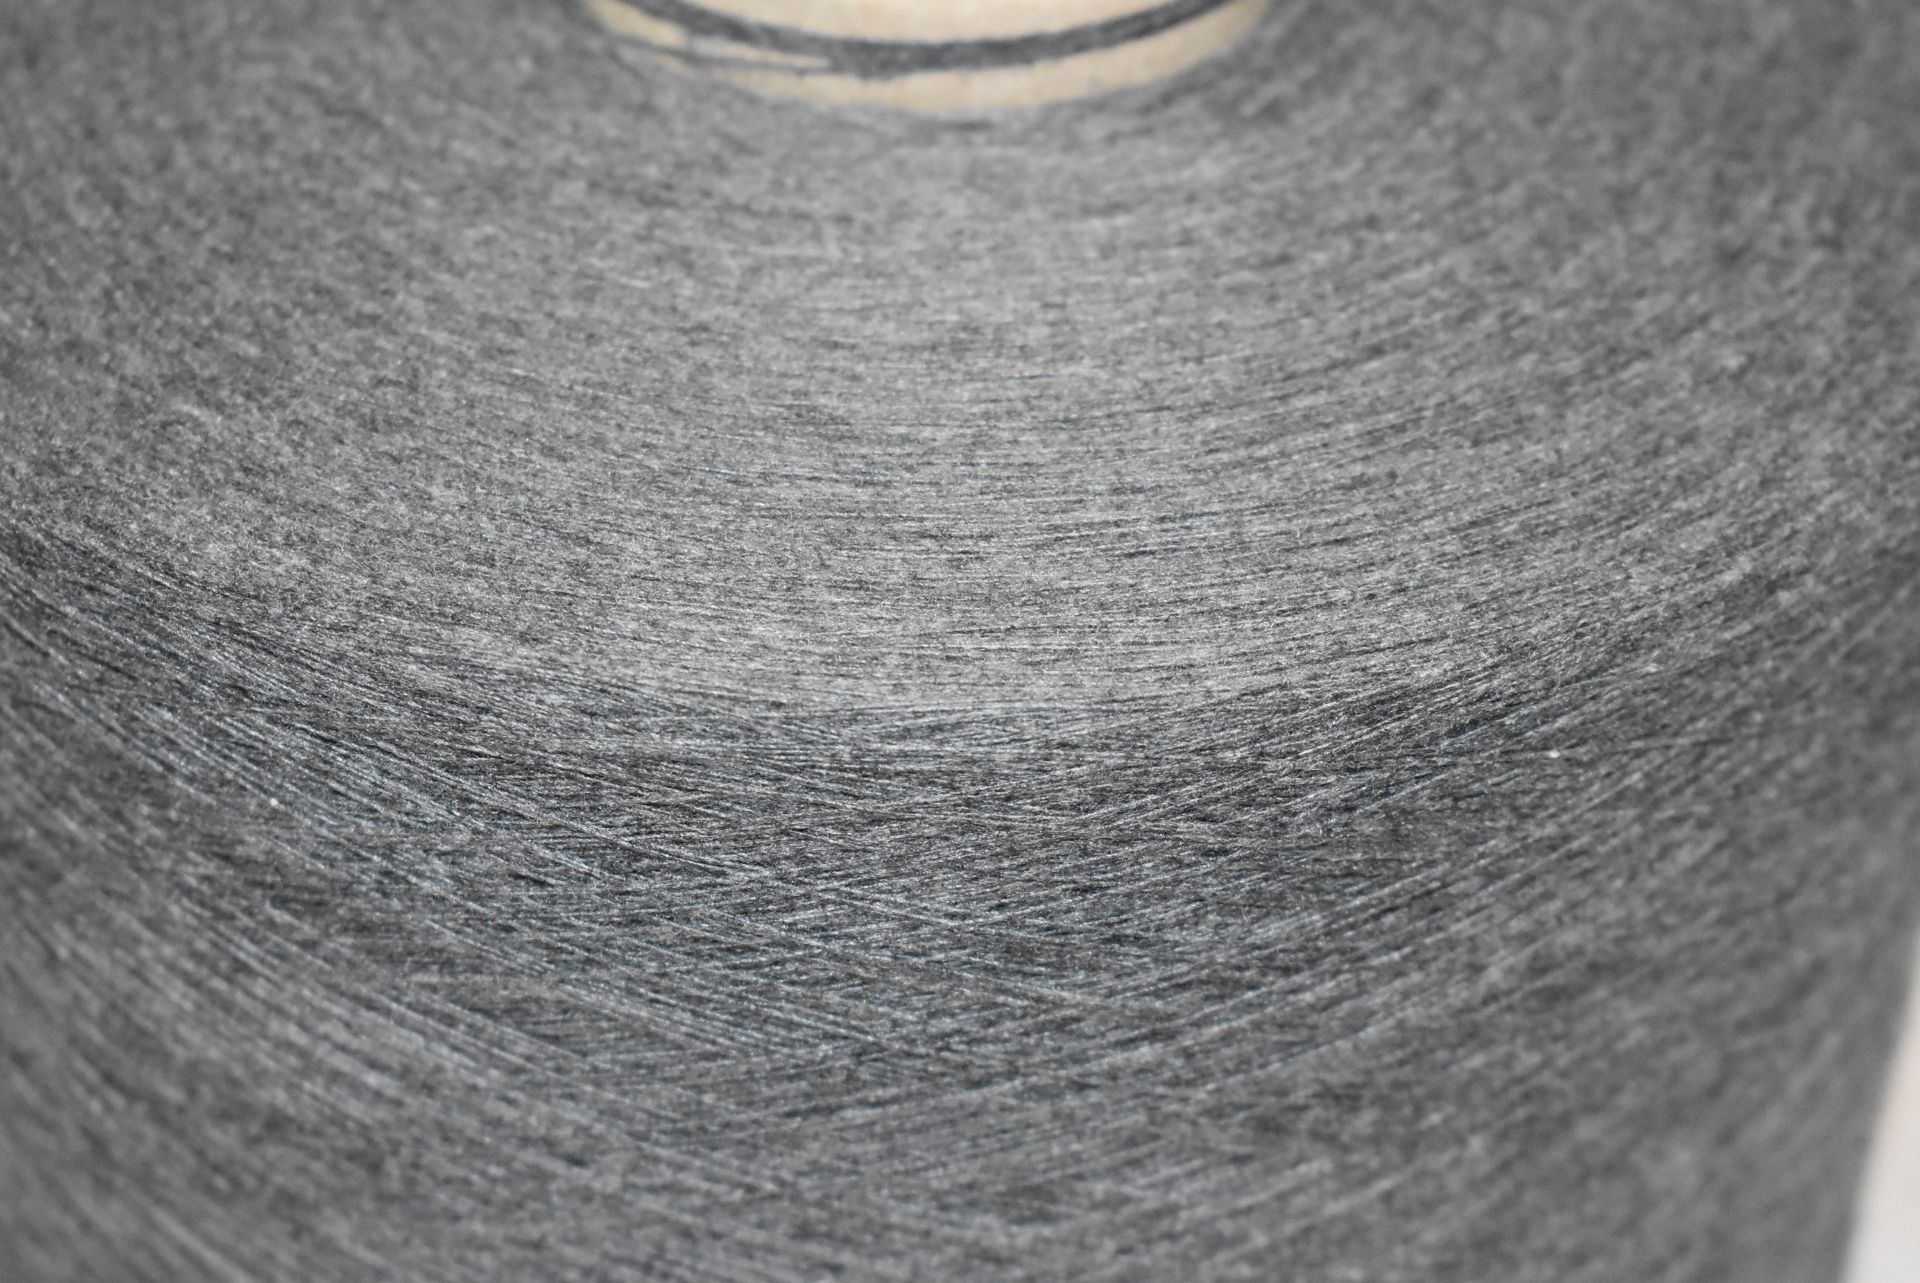 18 x Cones of 1/13 MicroCotton Knitting Yarn - Mid Grey - Approx Weight: 2,500g - New Stock ABL Yarn - Image 5 of 16